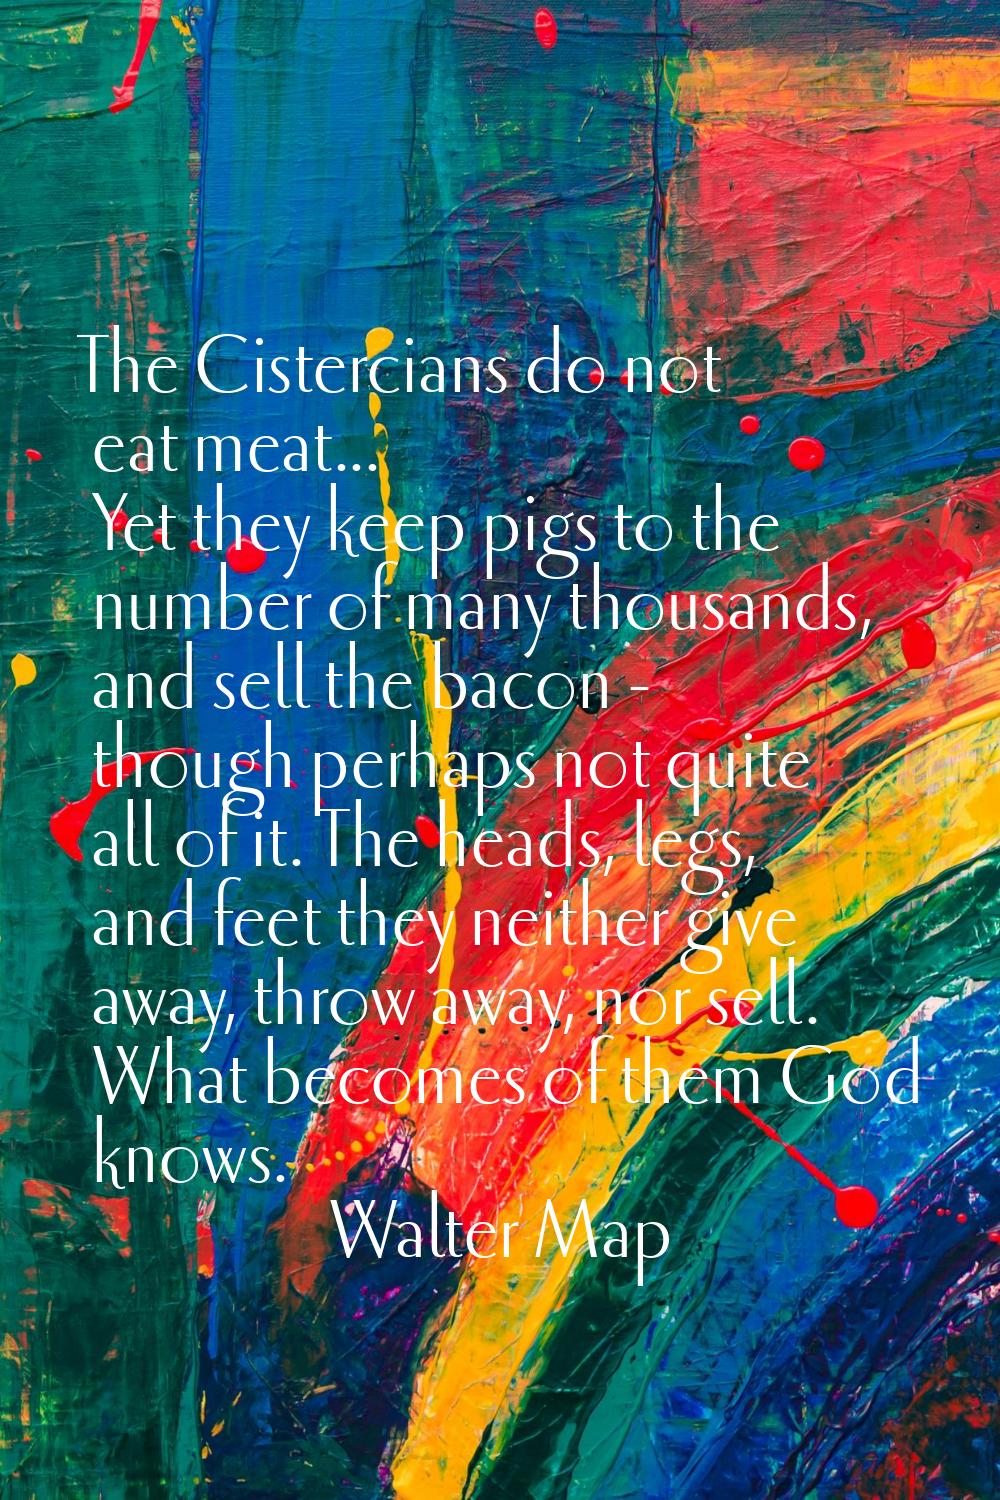 The Cistercians do not eat meat... Yet they keep pigs to the number of many thousands, and sell the